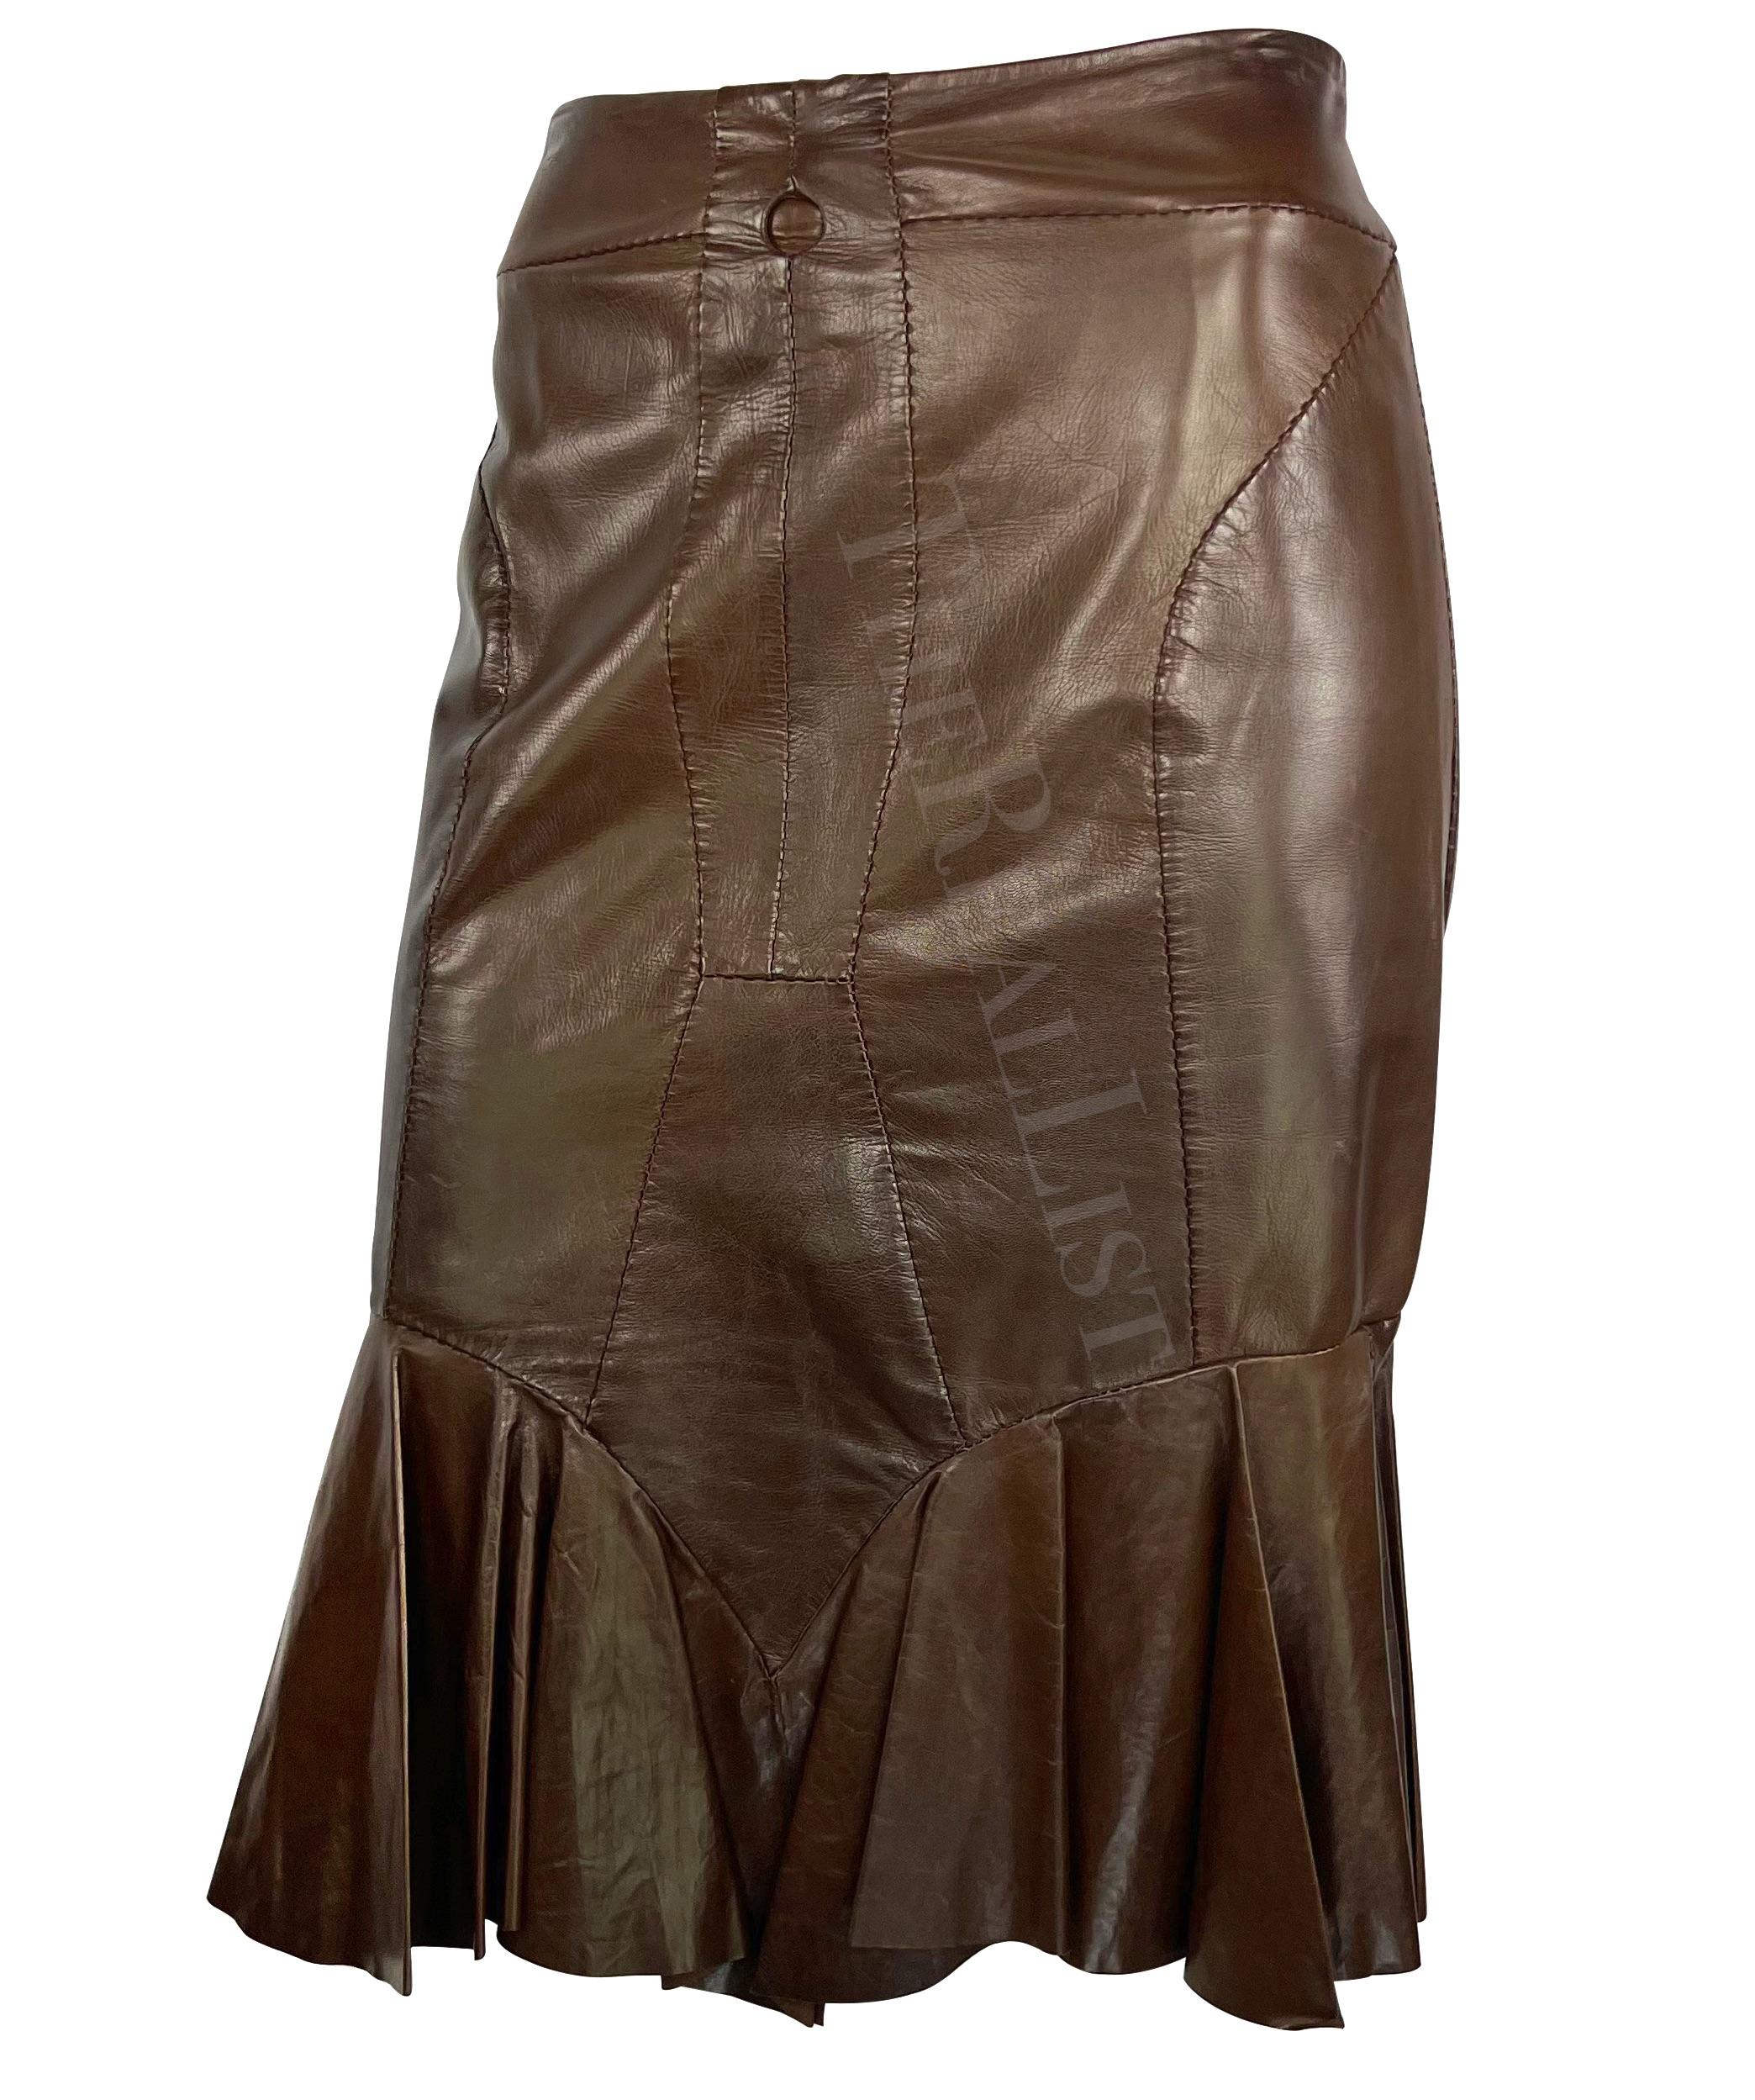 S/S 2003 Yves Saint Laurent by Tom Ford Anatomic Brown Leather Ruffle Skirt In Good Condition For Sale In West Hollywood, CA